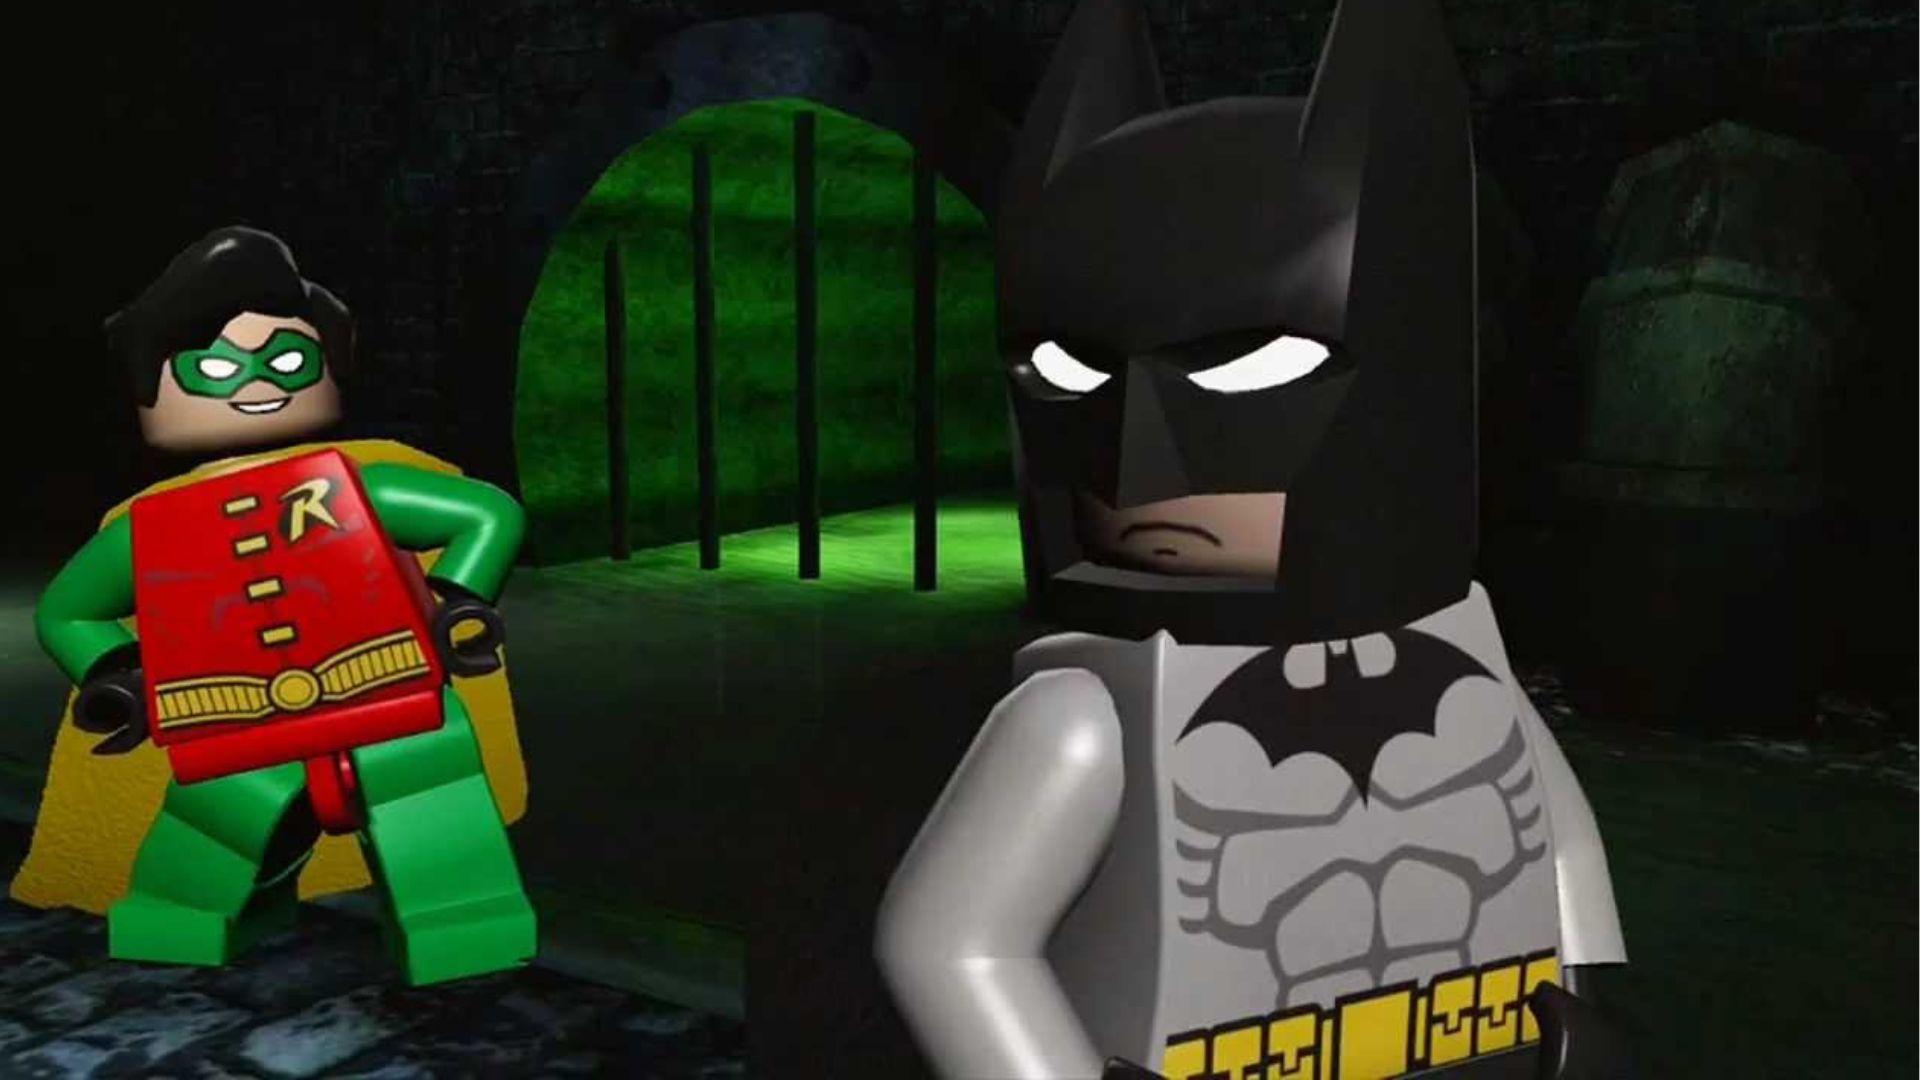 Lego Batman: The Videogame's gameplay is similar to previous LEGO games.